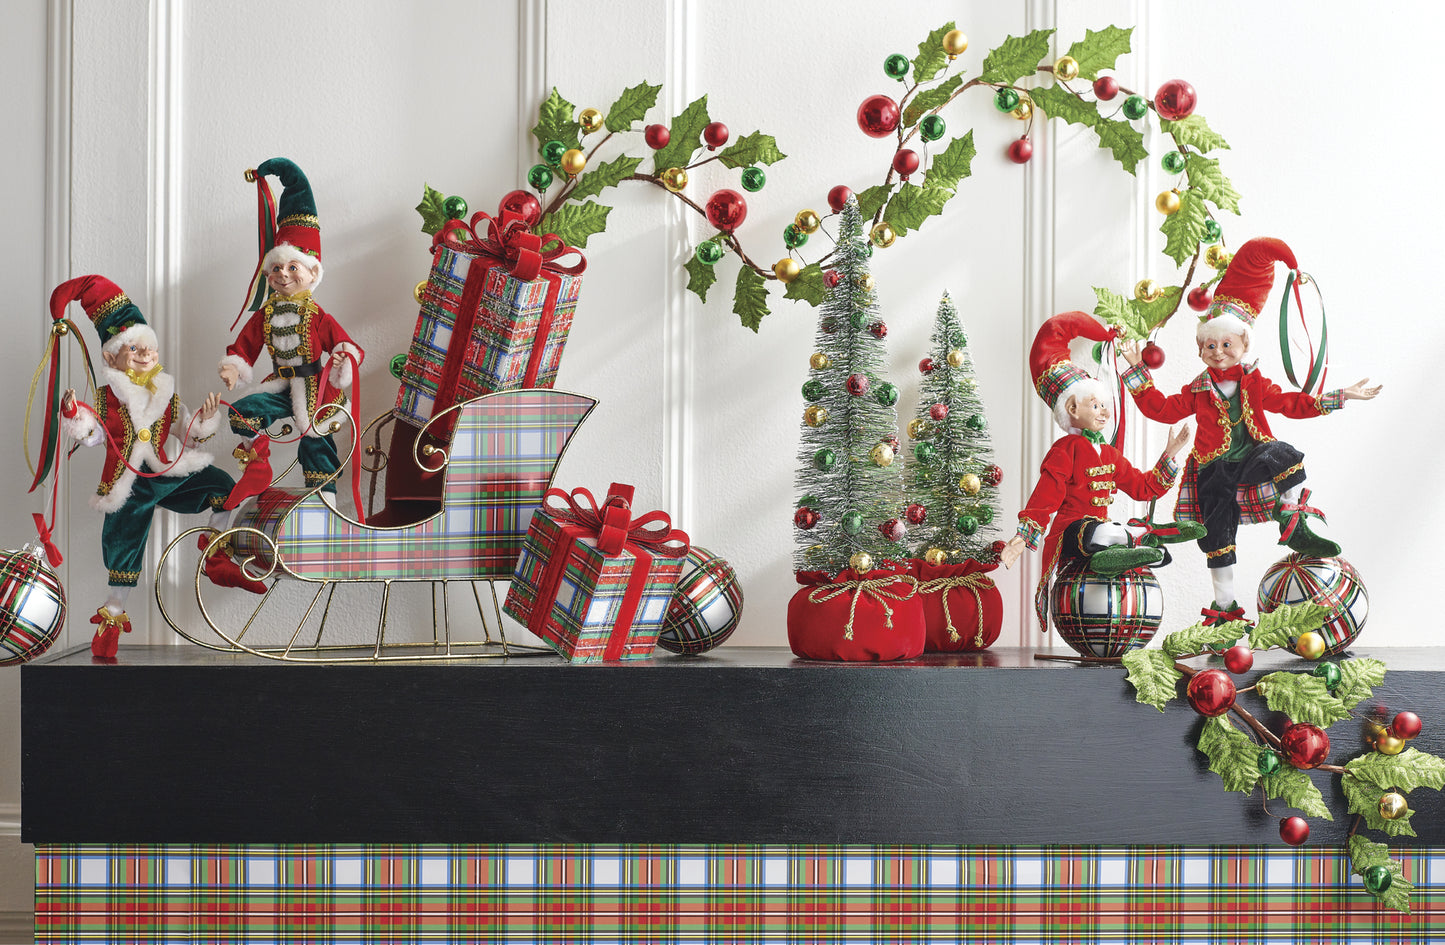 10" Plaid Package Ornaments and 16" Tartan Elves. Placed on a mantel surrounded by holly jolly décor and ornaments.